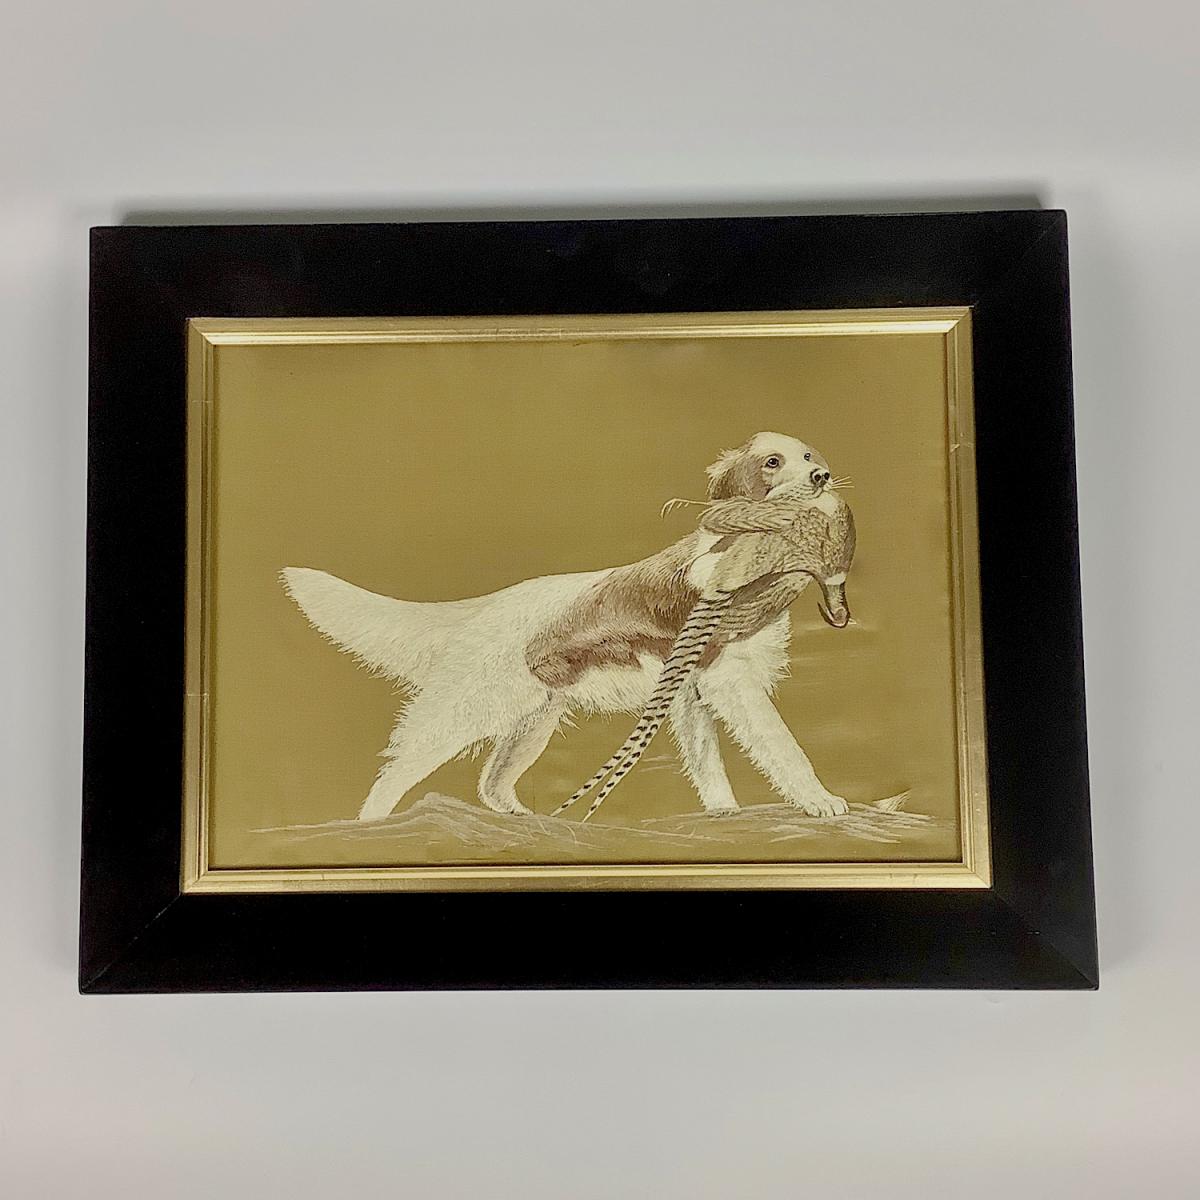 Japanese silk embroidery with a hunting dog